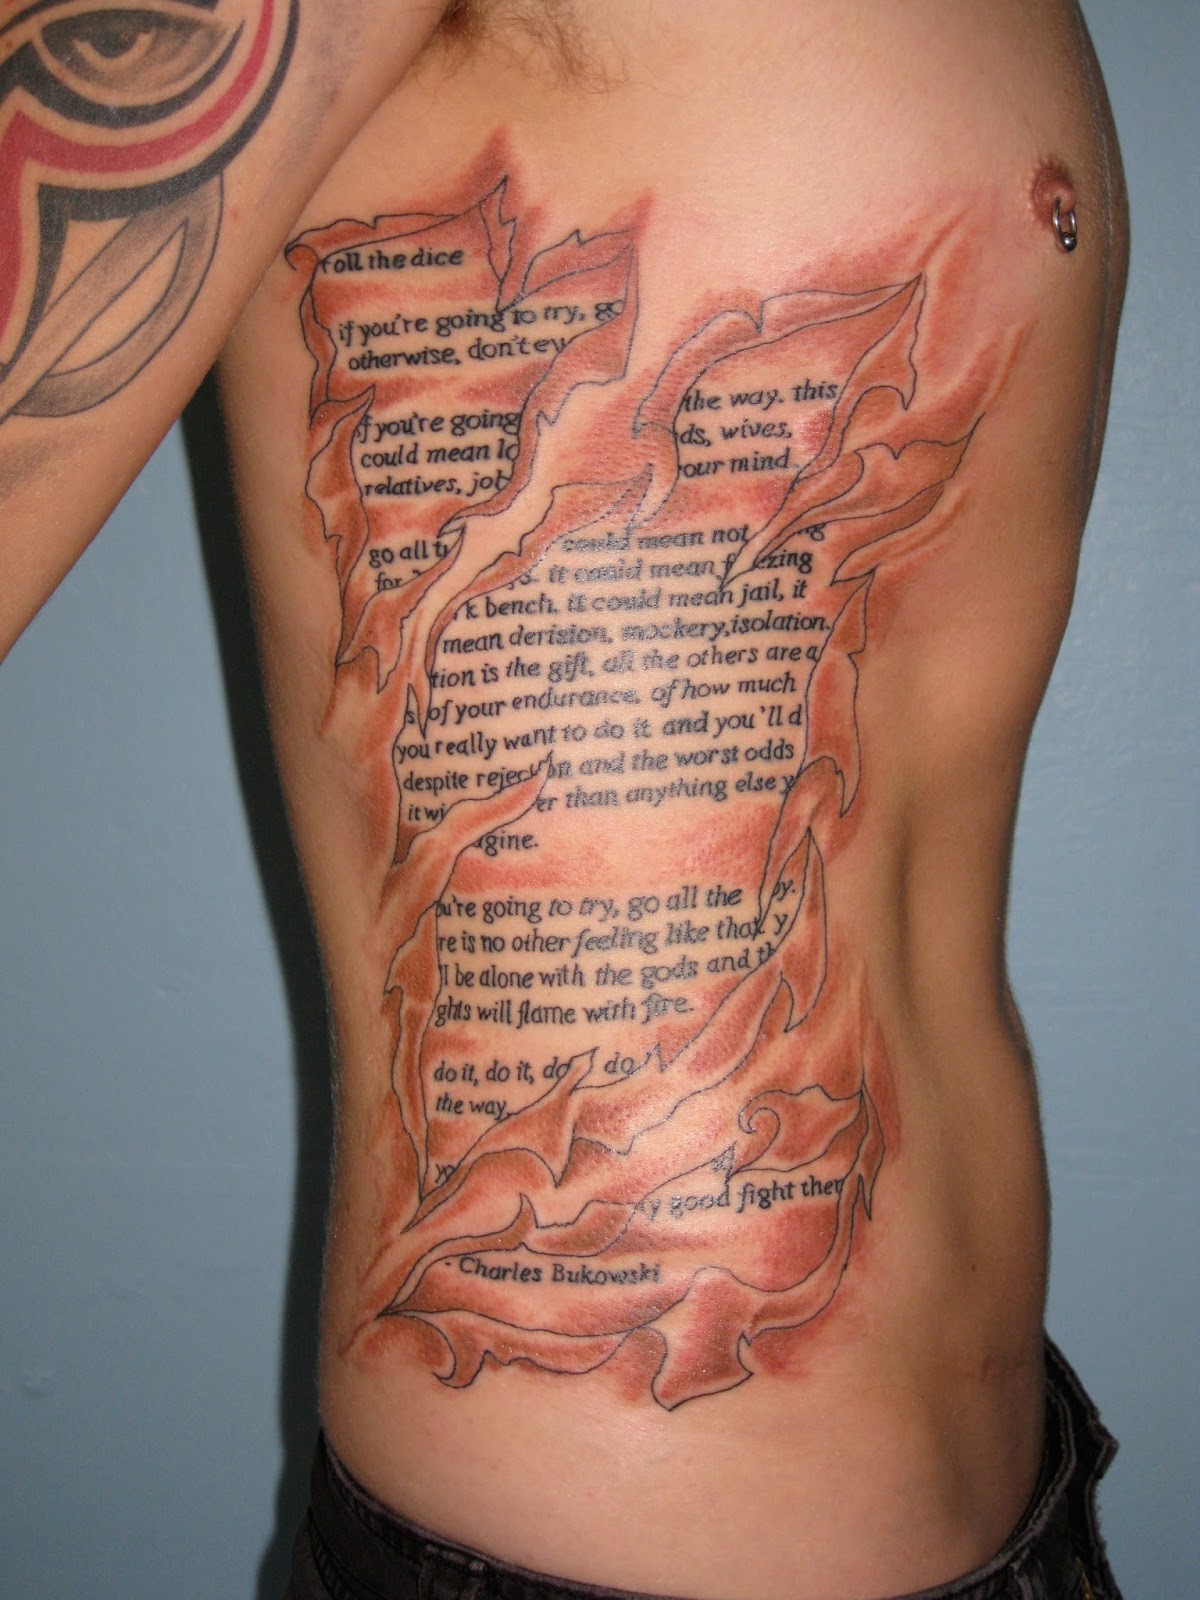 Scripture Tattoos Designs, Ideas and Meaning | Tattoos For You